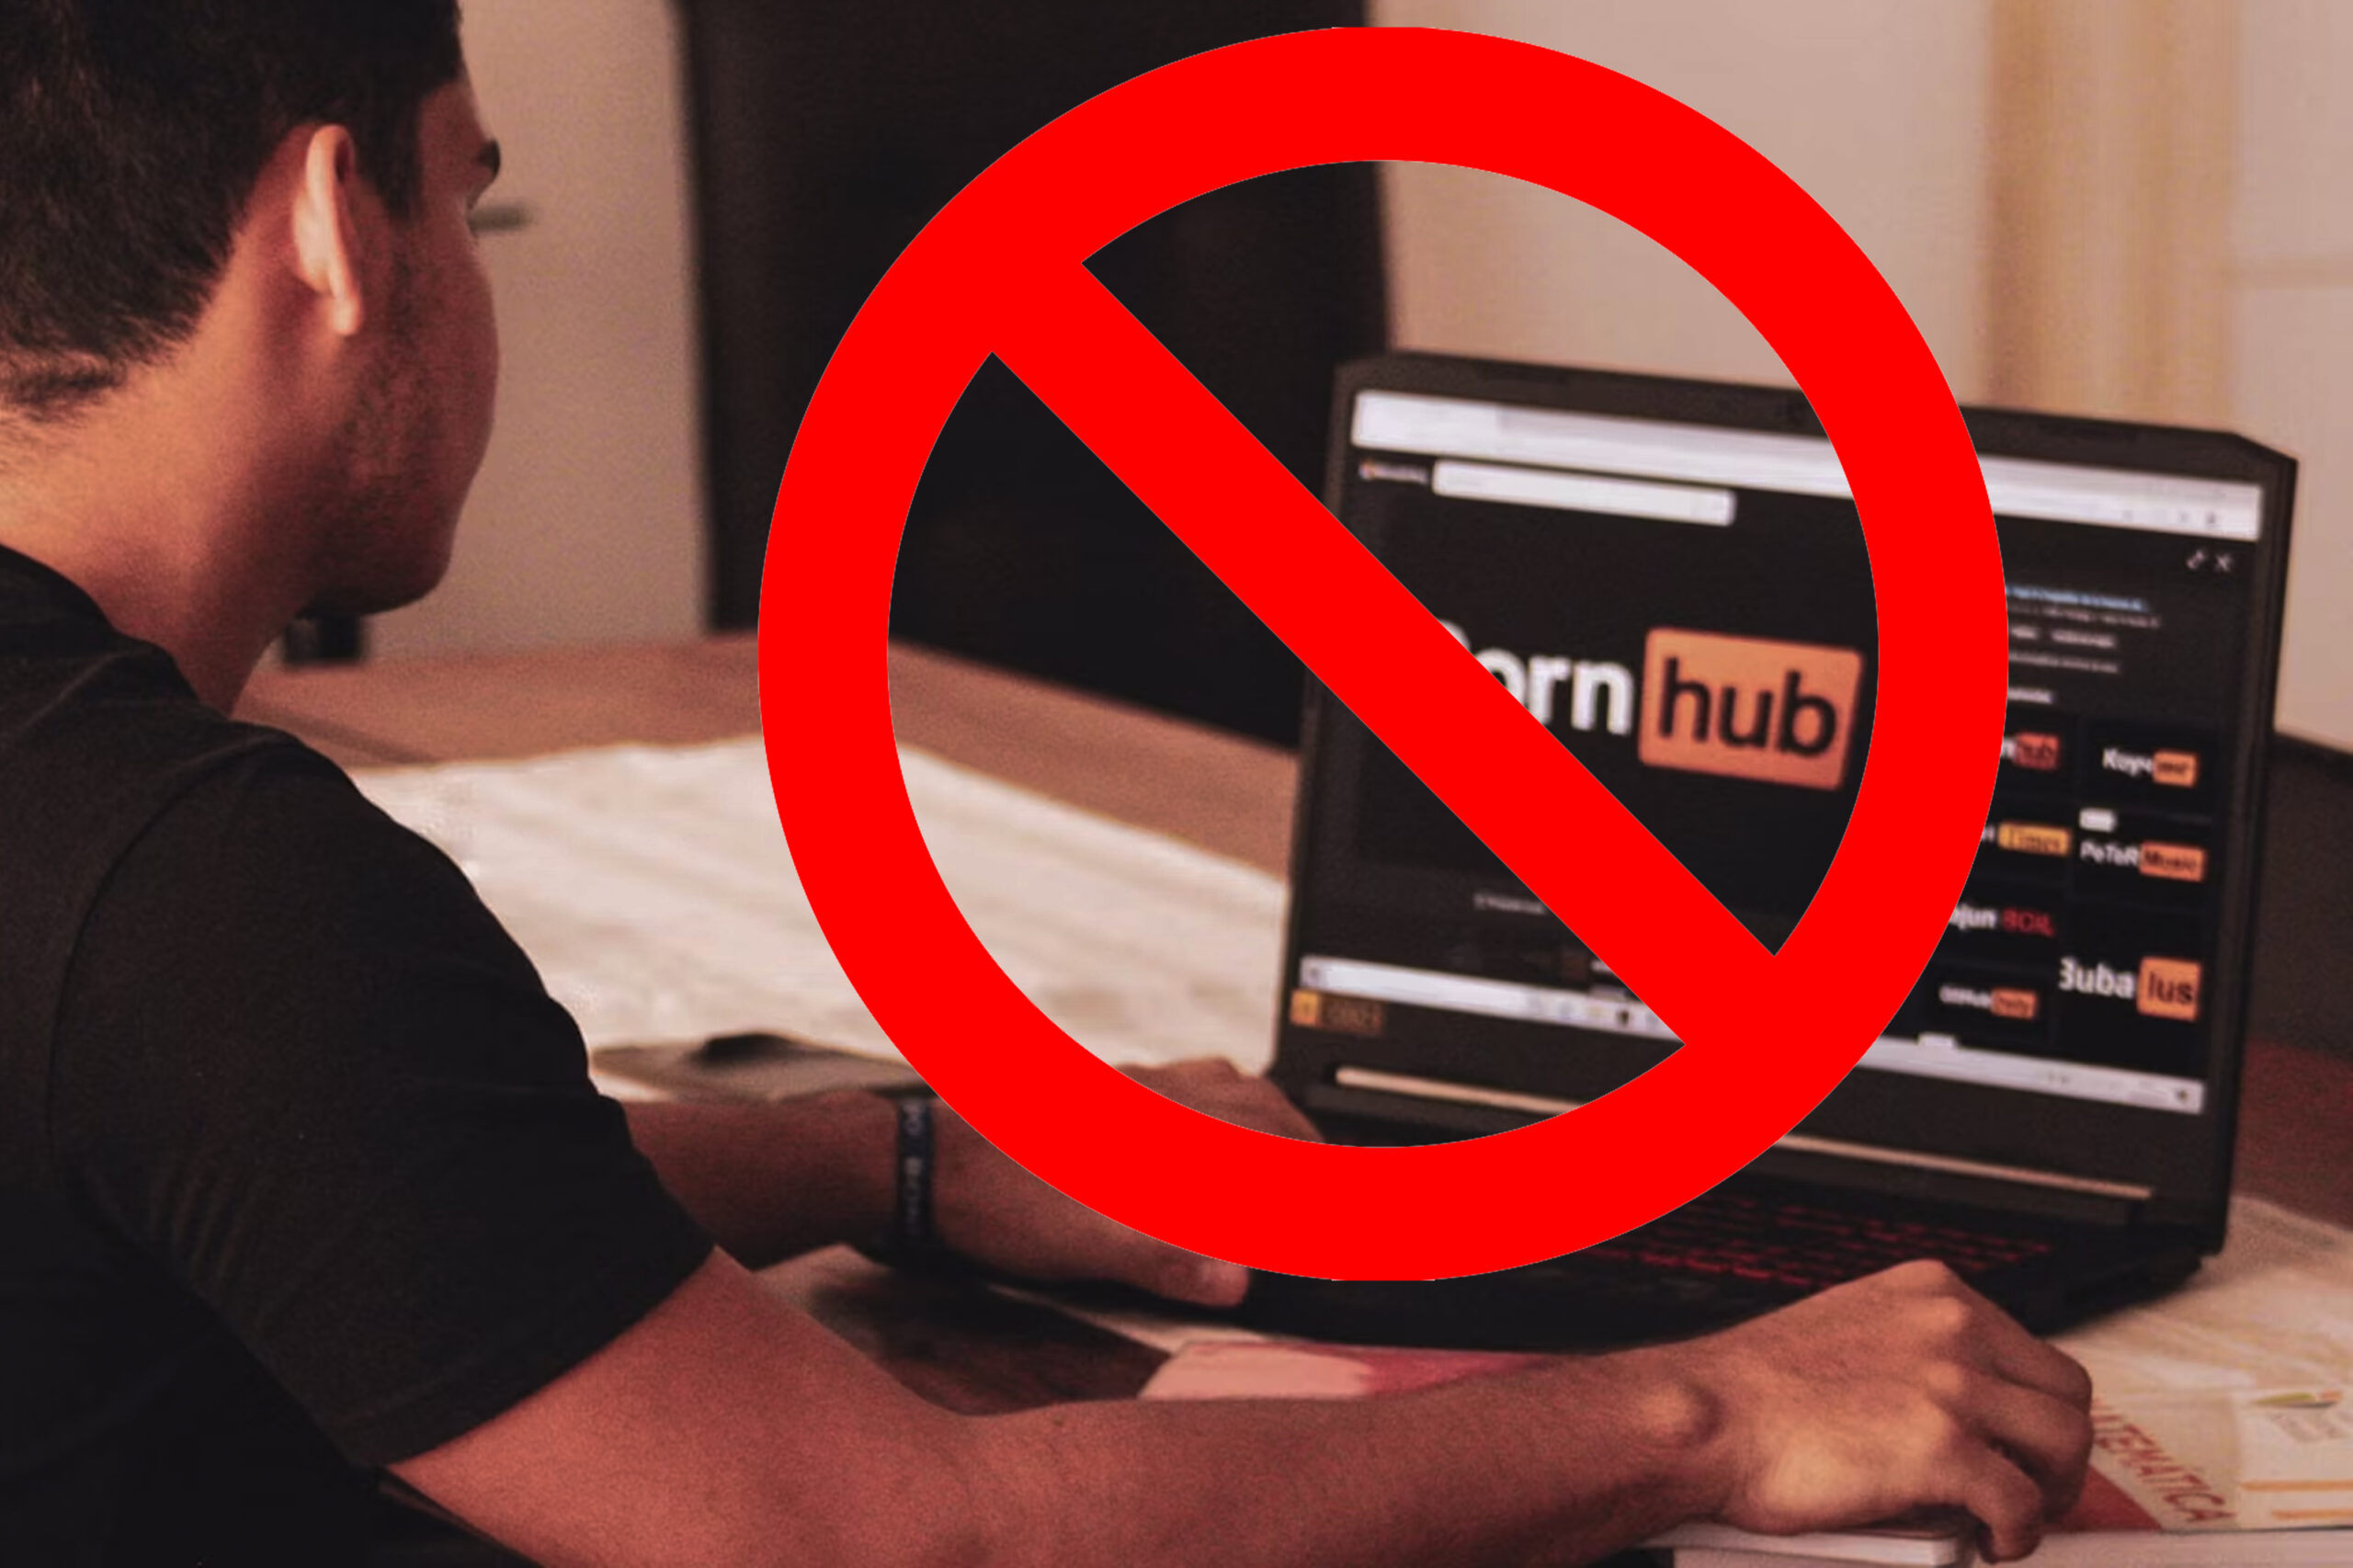 Pnrnhub - Pornhub Blocks Access In Utah Because of State's New Age Verification Law -  RELEVANT